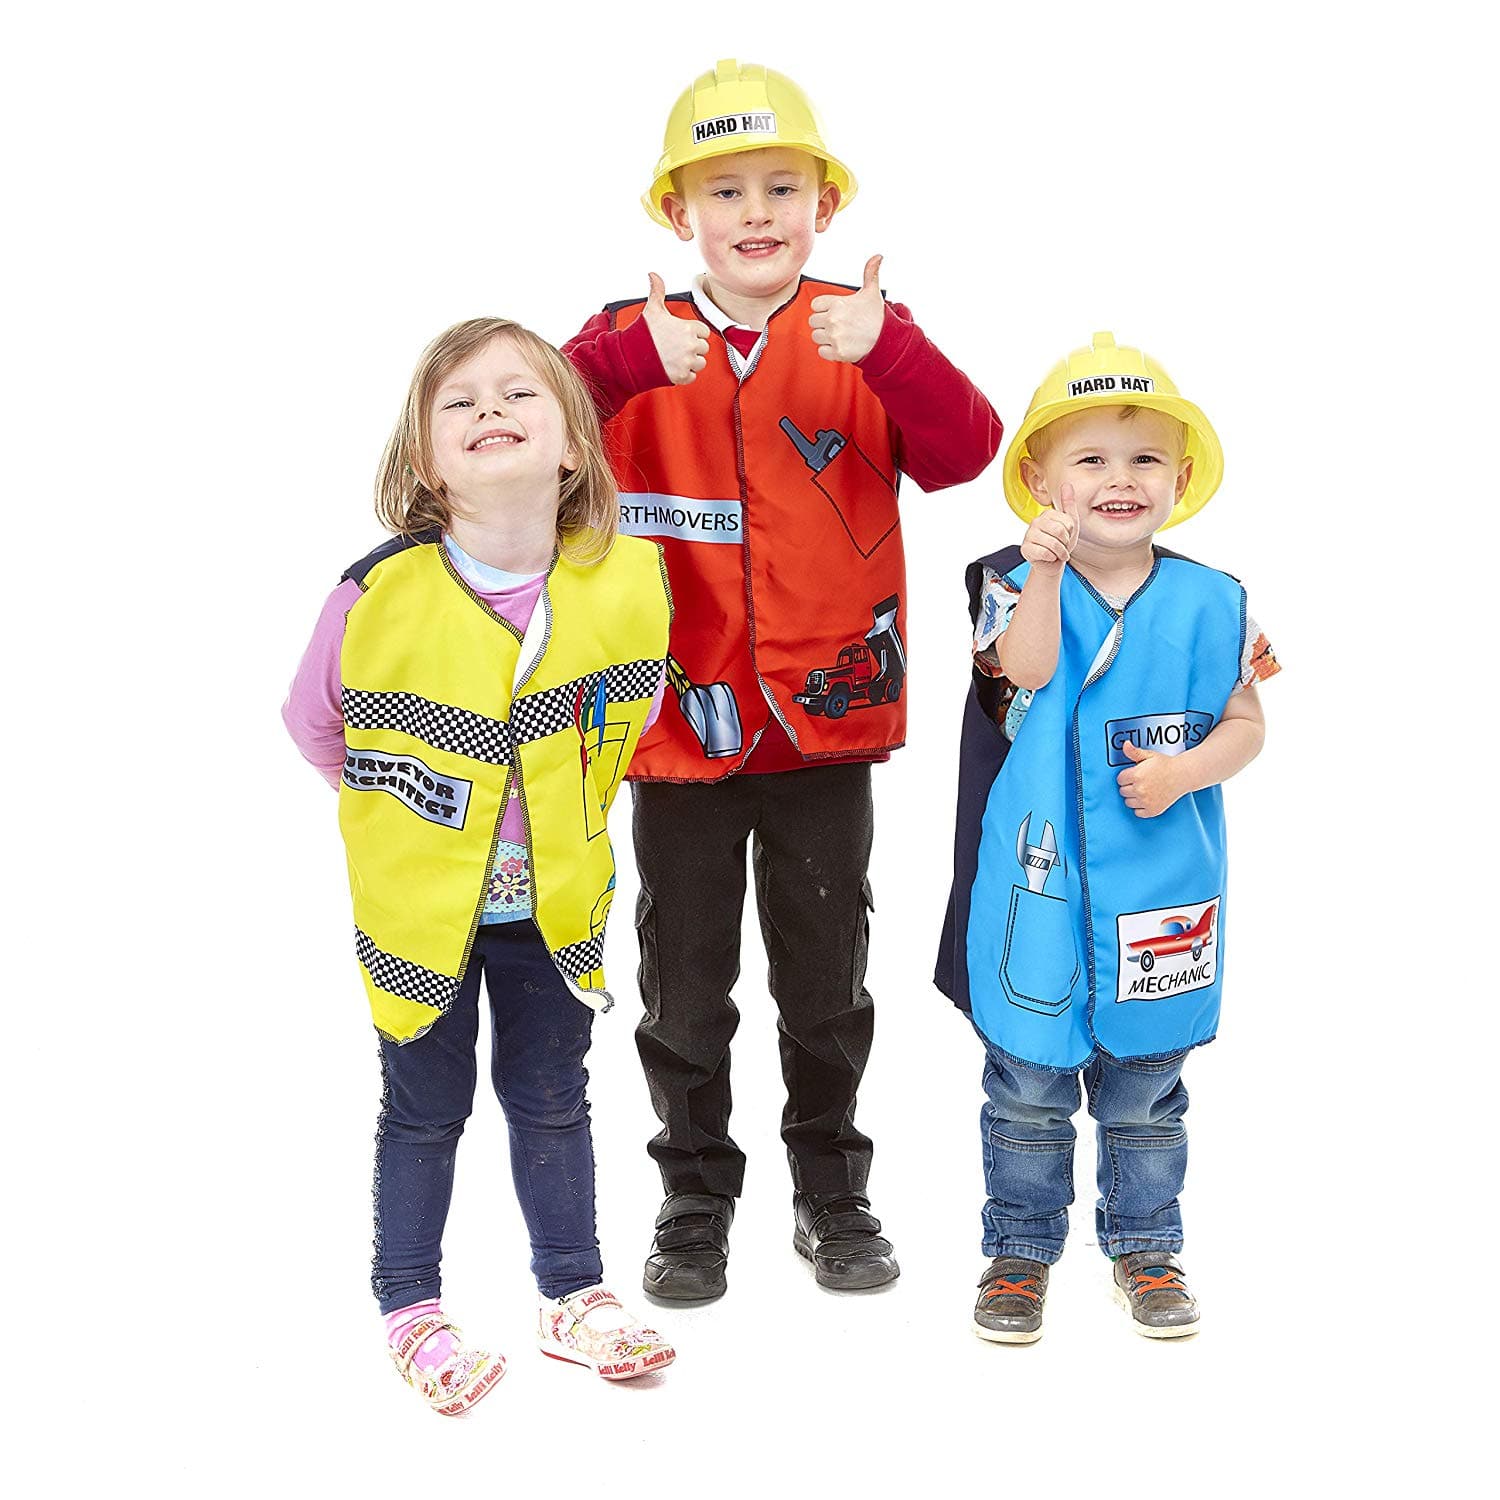 Construction Tabard and Hard Hat Set of 6, Introducing our Construction Tabard and Hard Hat Set of 6, the ideal addition to your dressing up box and role play area. This set includes tabards and hard hats, providing children with everything they need to become a construction worker and embark on exciting imaginary adventures.Unleash your child's creativity and imagination as they dress up and immerse themselves in the world of construction. With this set, they can build skyscrapers, repair roads, or constru